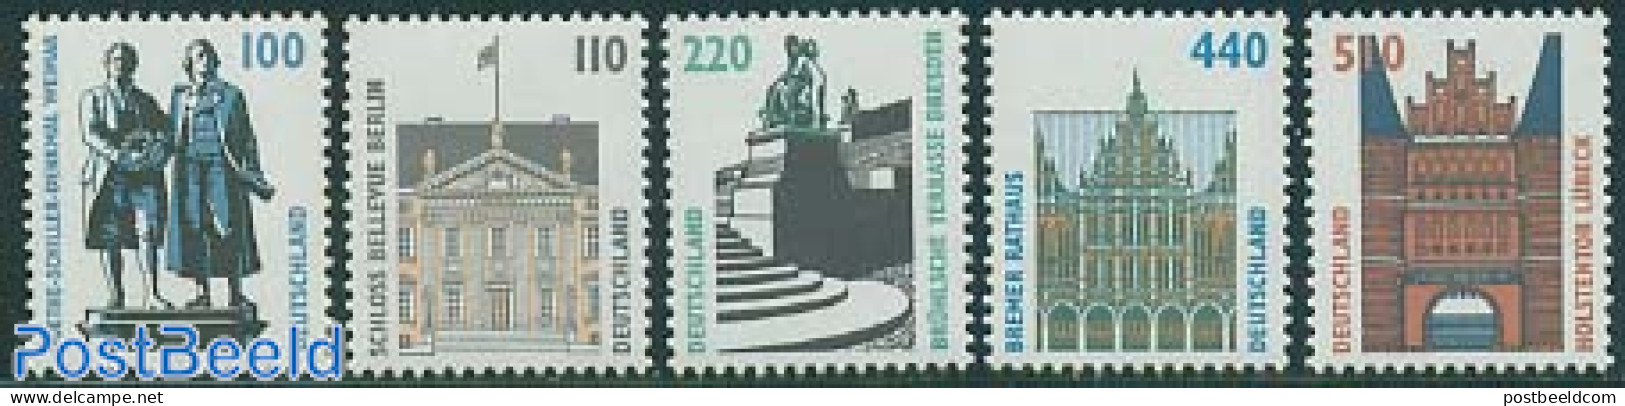 Germany, Federal Republic 1997 Definitives 5v, Mint NH, Art - Castles & Fortifications - Sculpture - Neufs